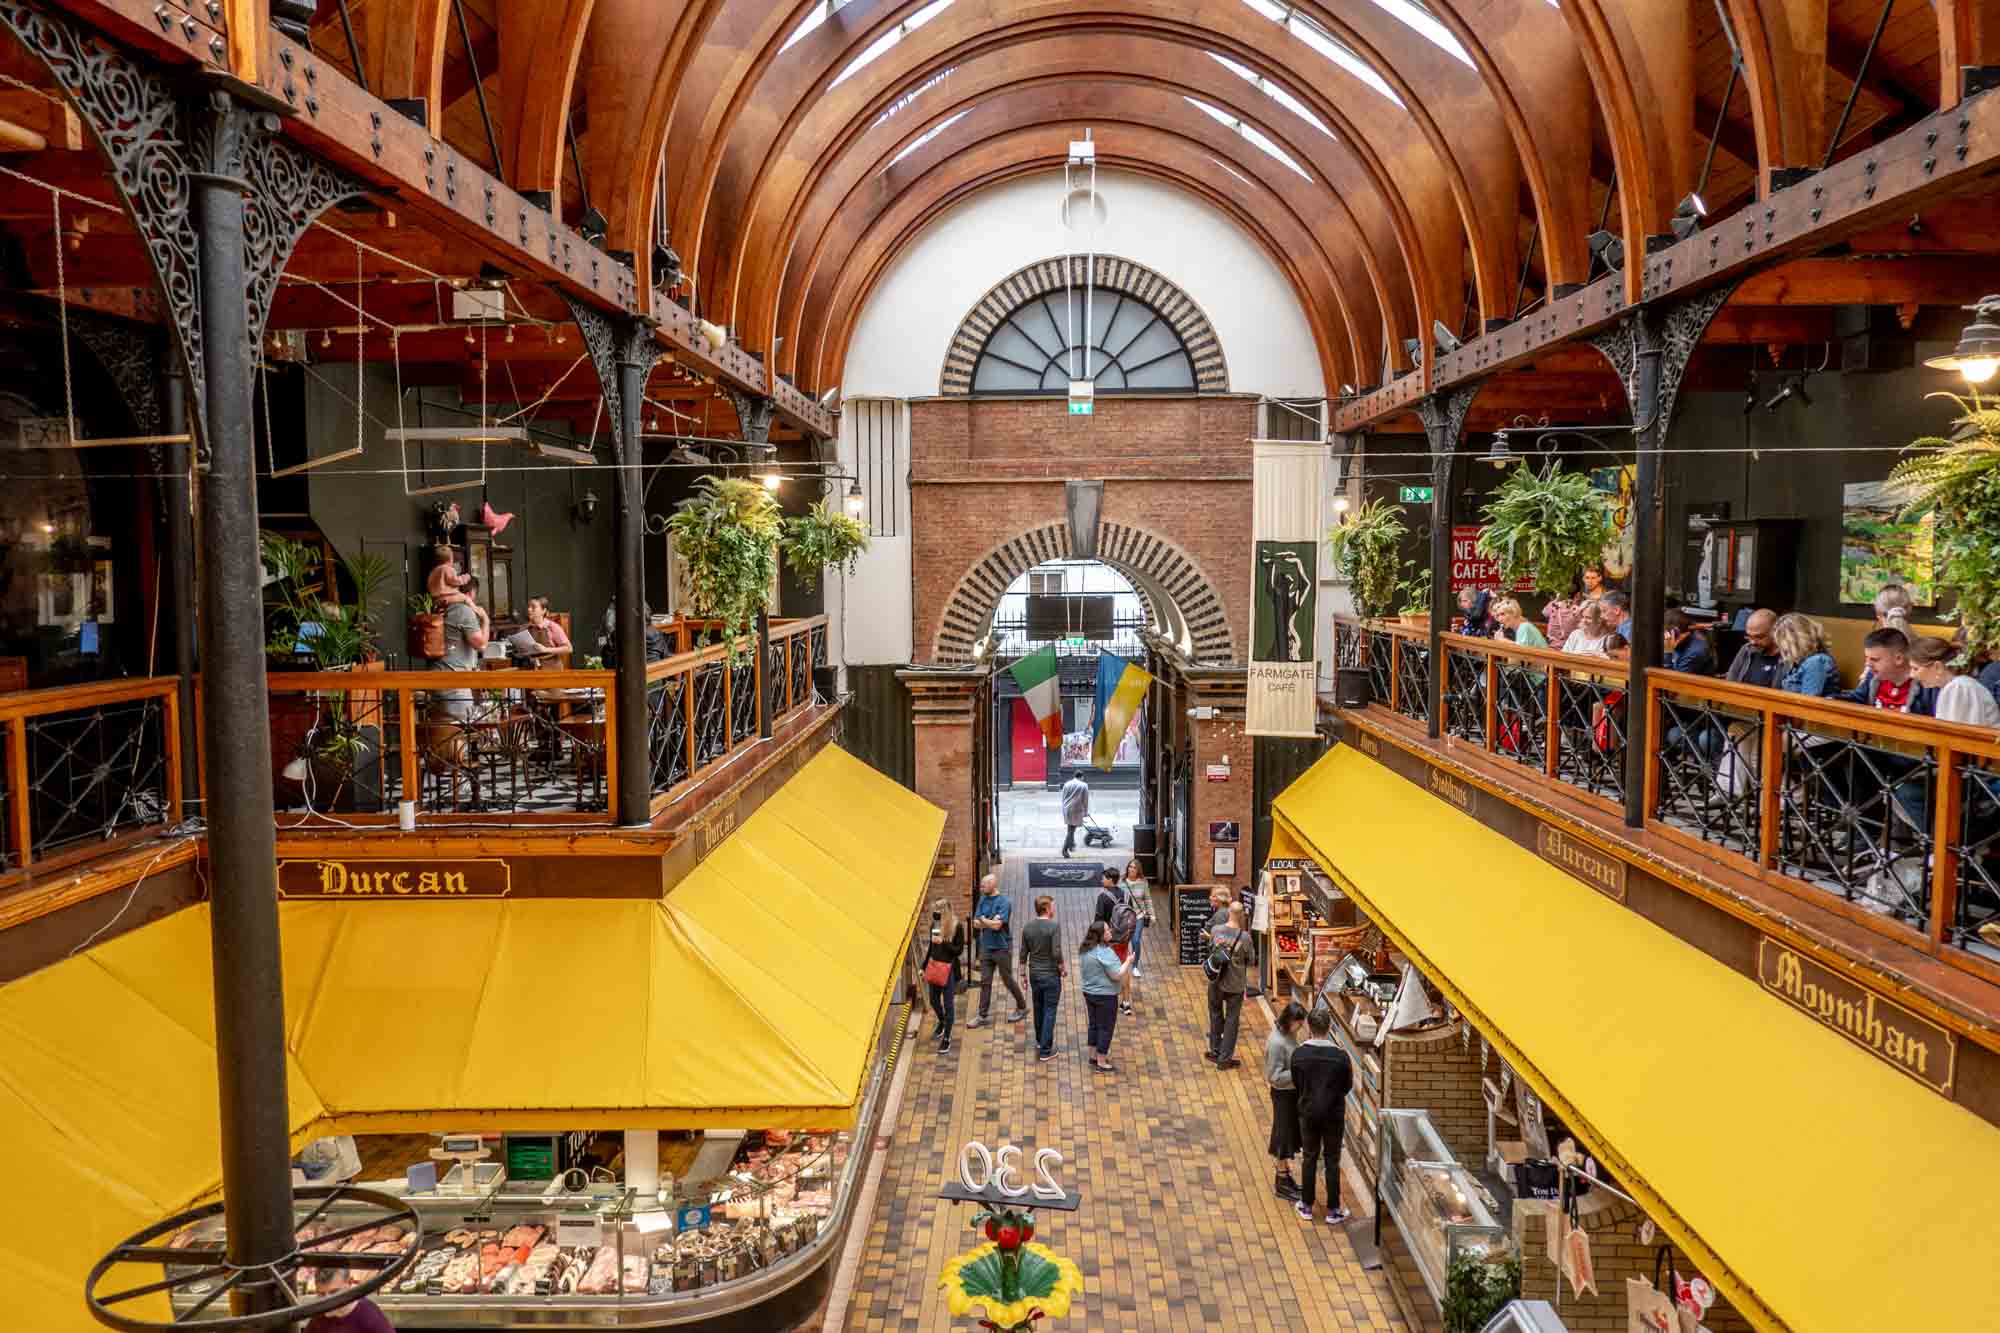 People shopping inside a two-story market hall with yellow awnings